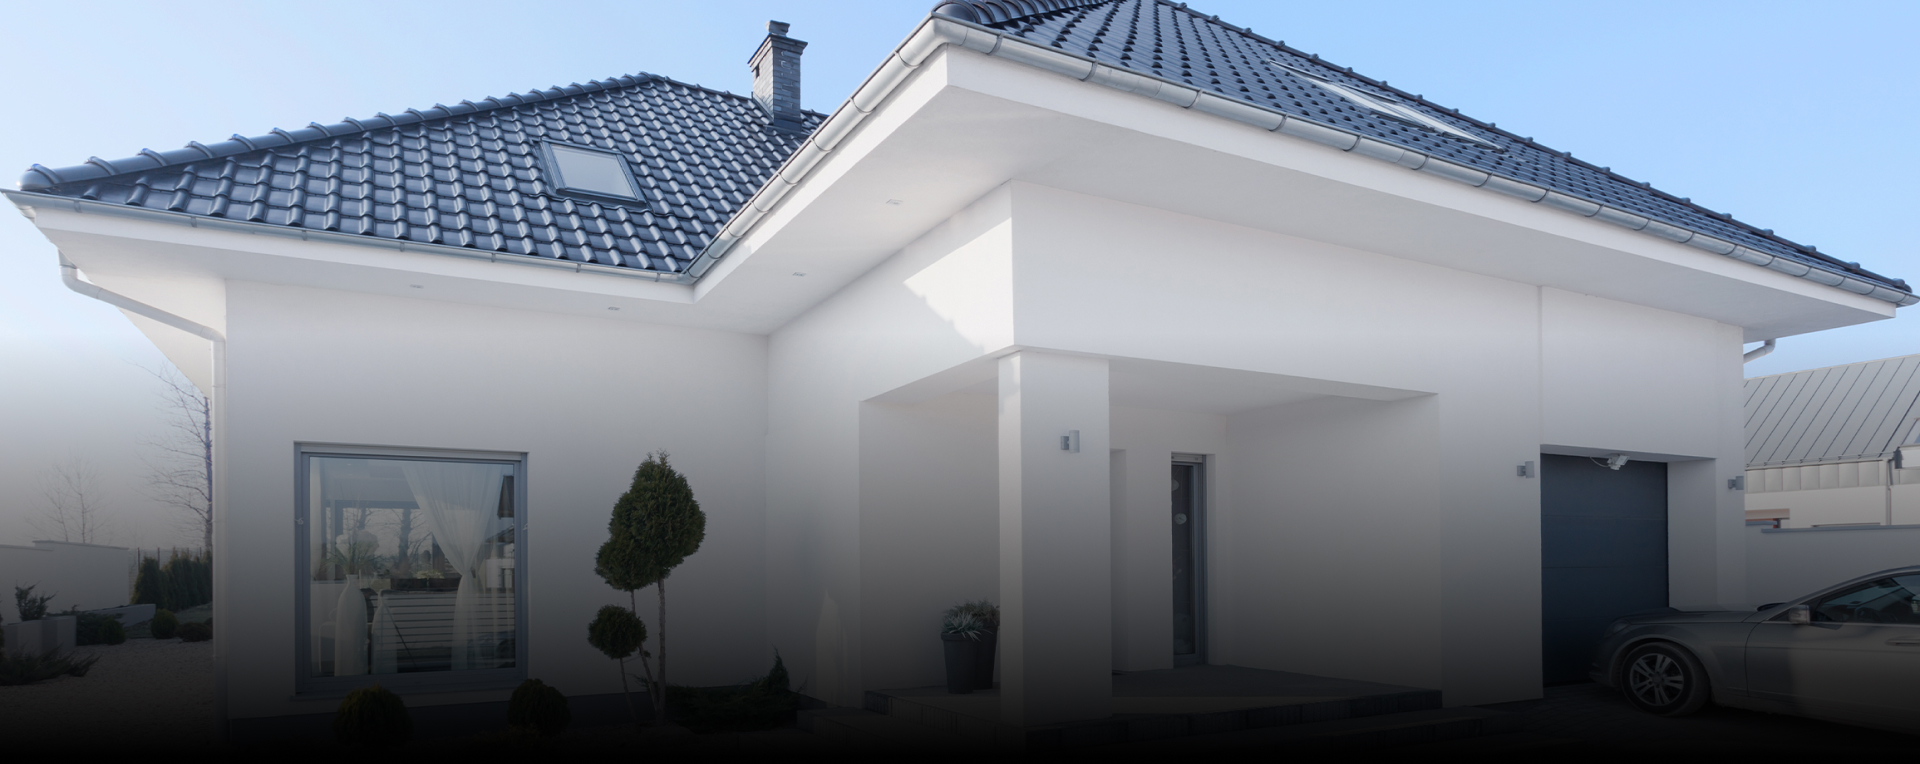 Get all your questions related to Stucco, EIFS, and Plaster Services answered by Custom Stucco Solutions